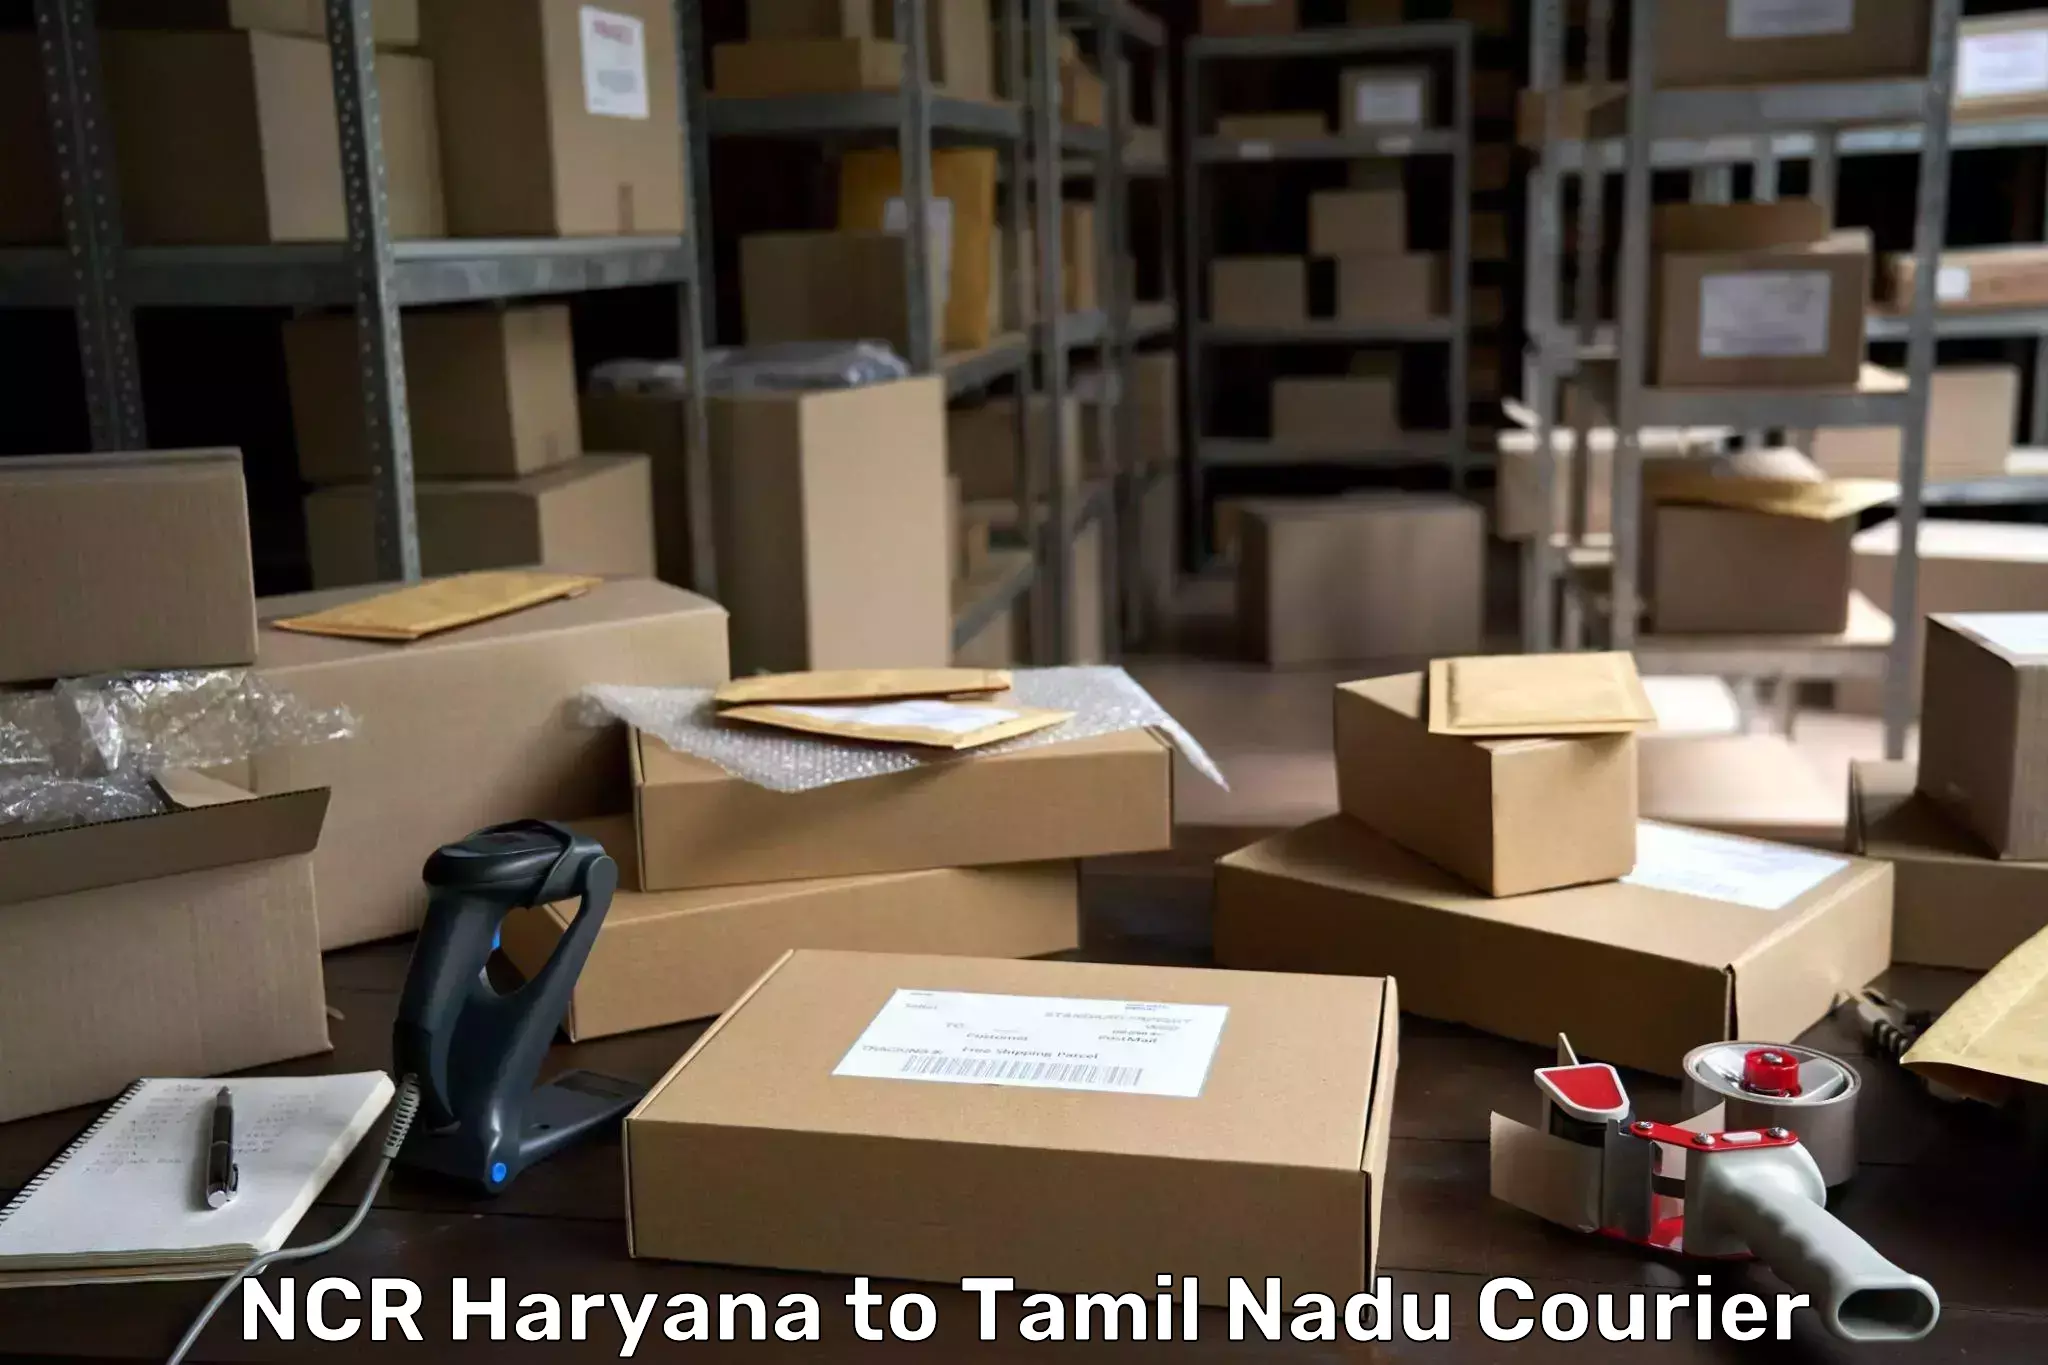 24/7 courier service in NCR Haryana to Tamil Nadu